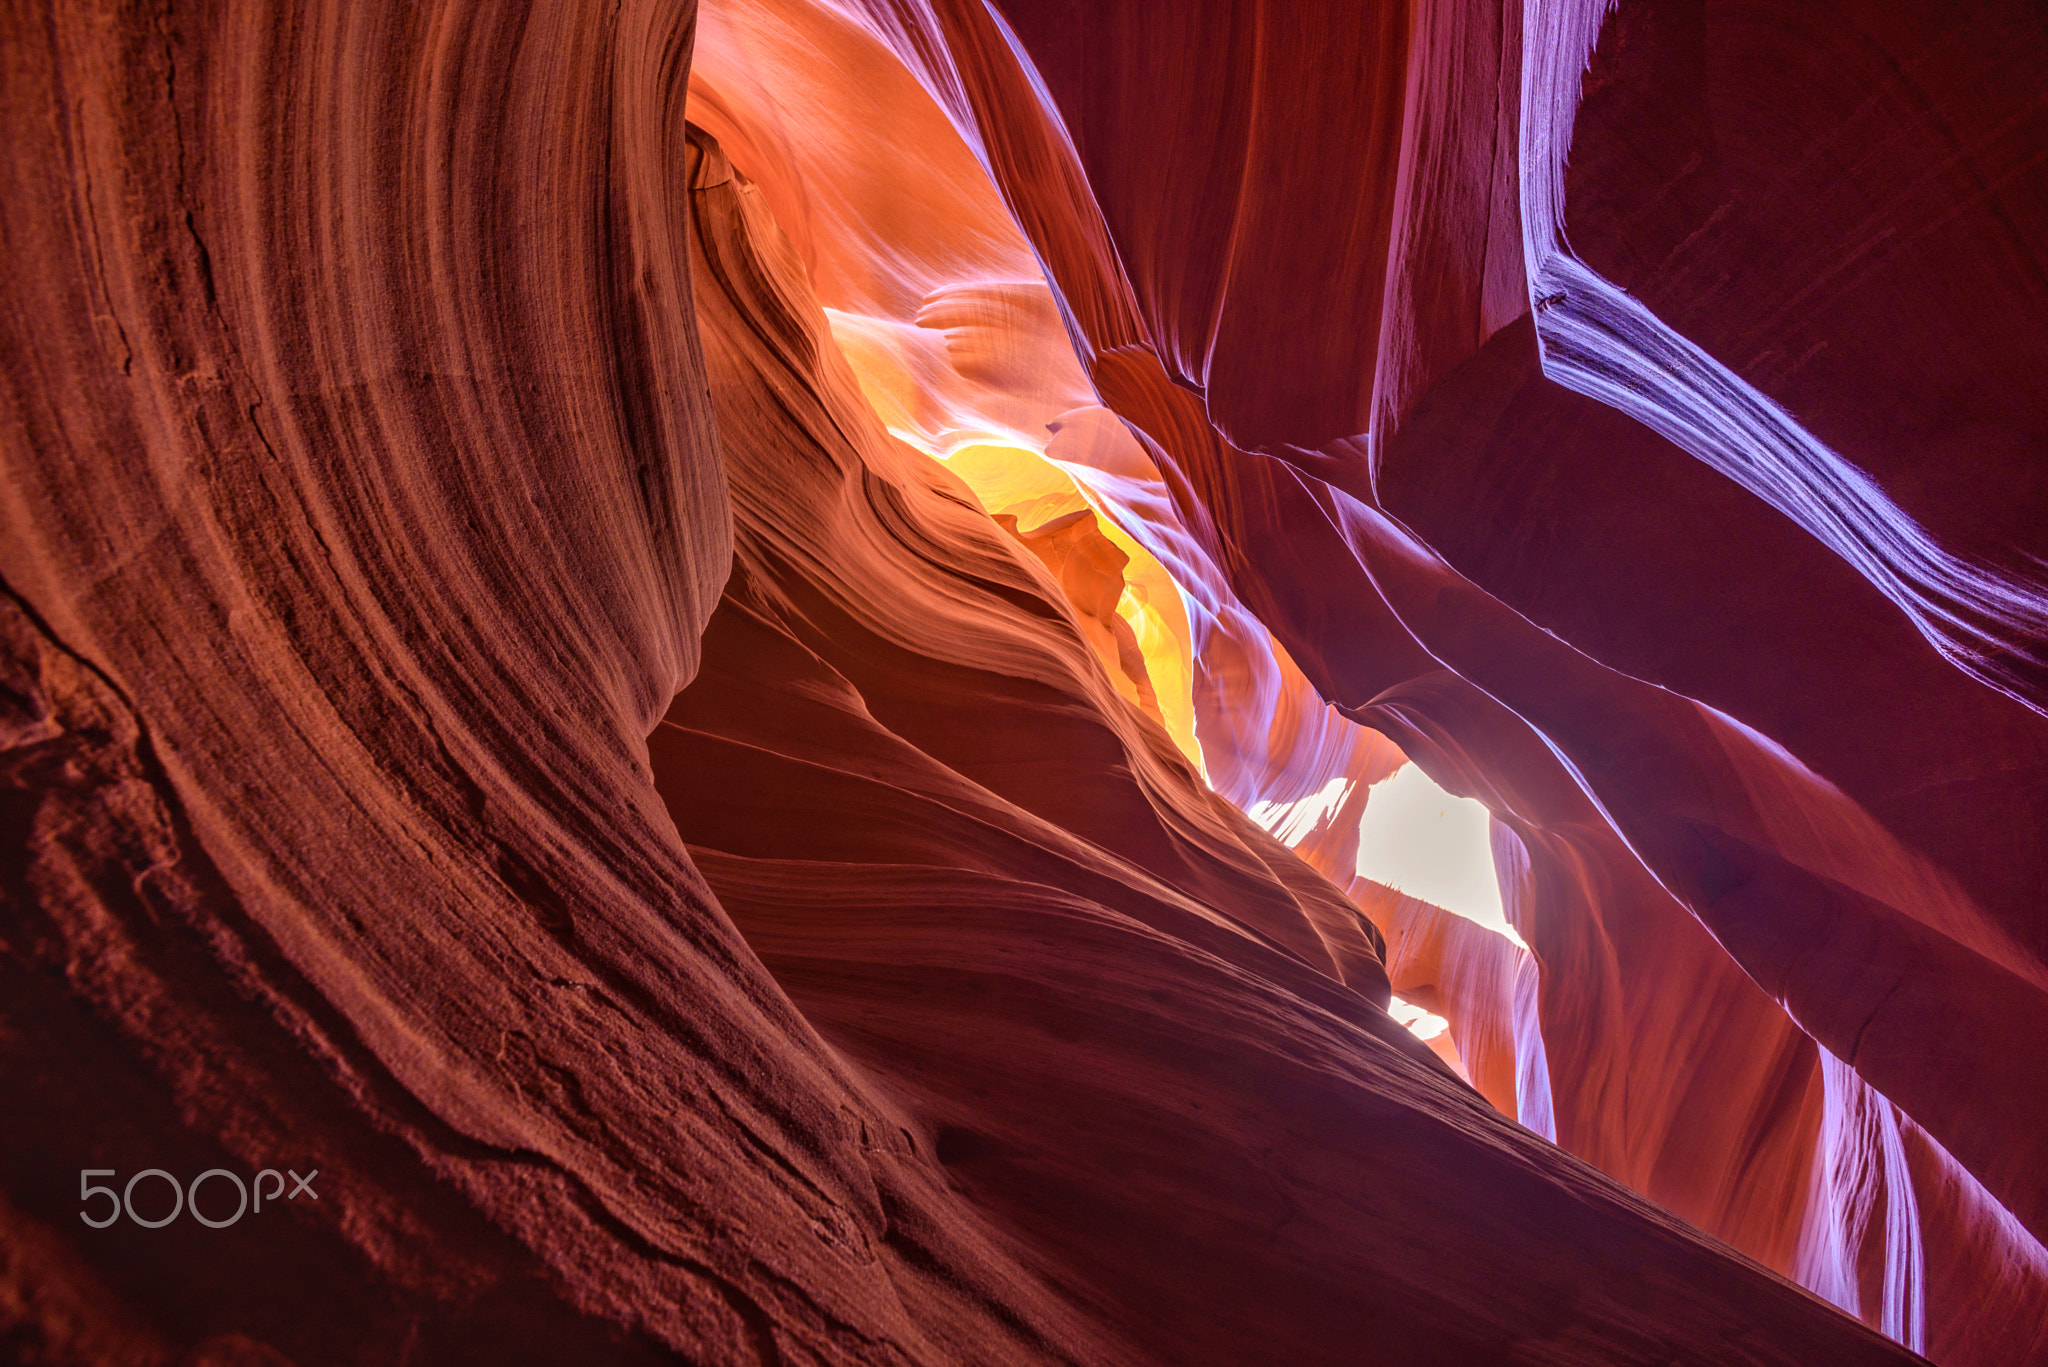 Lower Antelope Canyon Colors